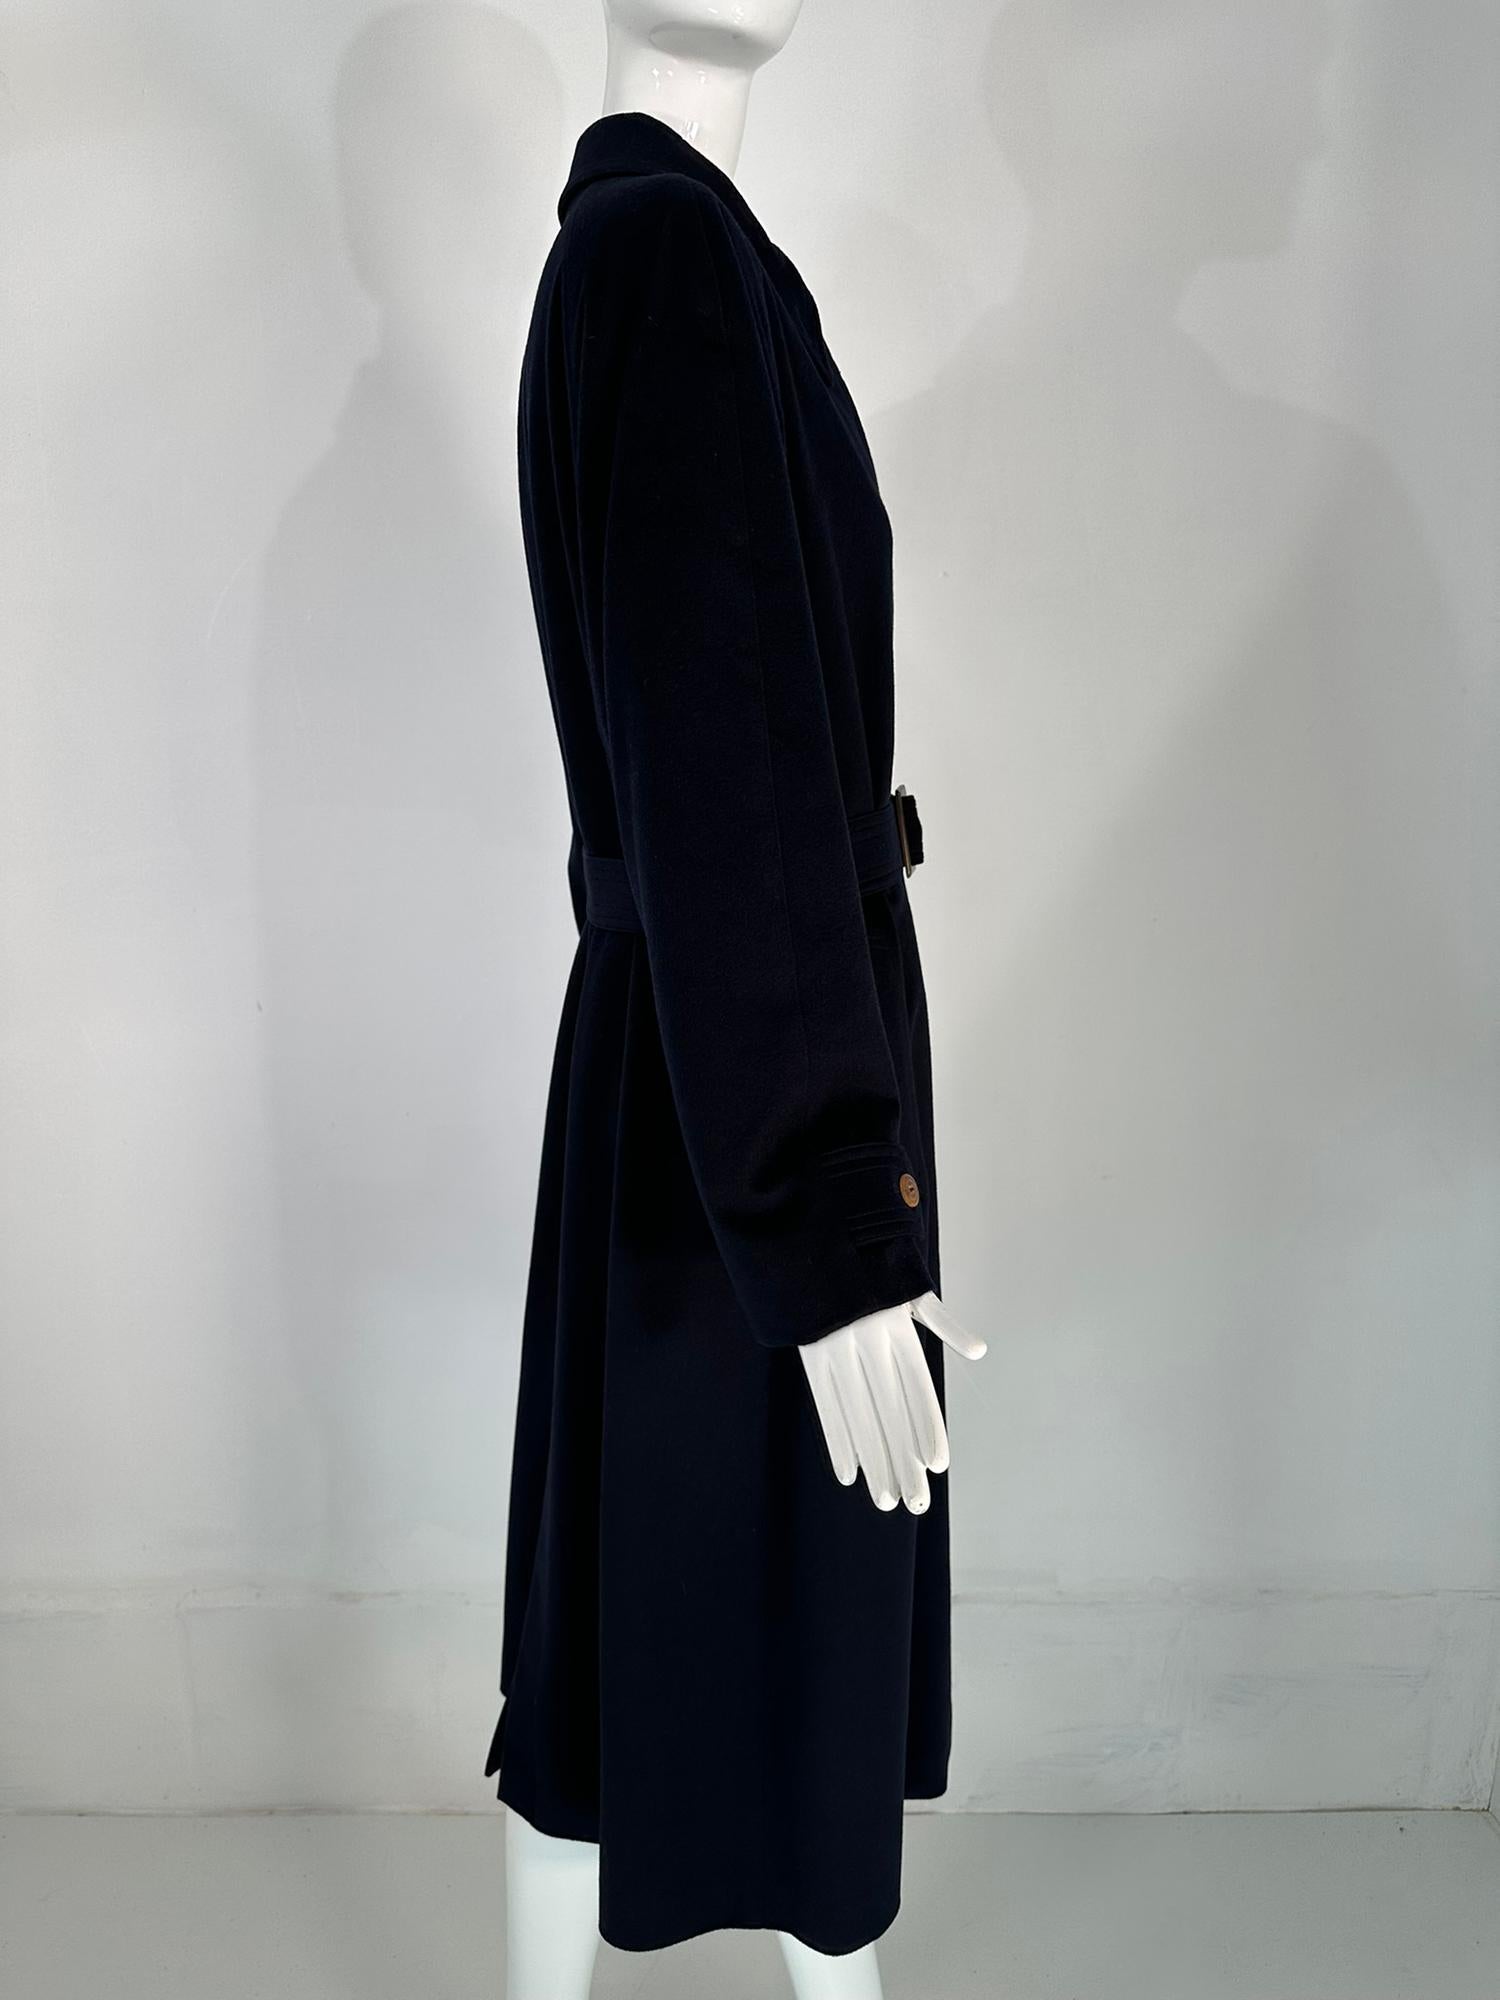 Giorgio Armani Classico Navy Blue Cashmere Raglan Sleeve Belted Over Coat  For Sale 1